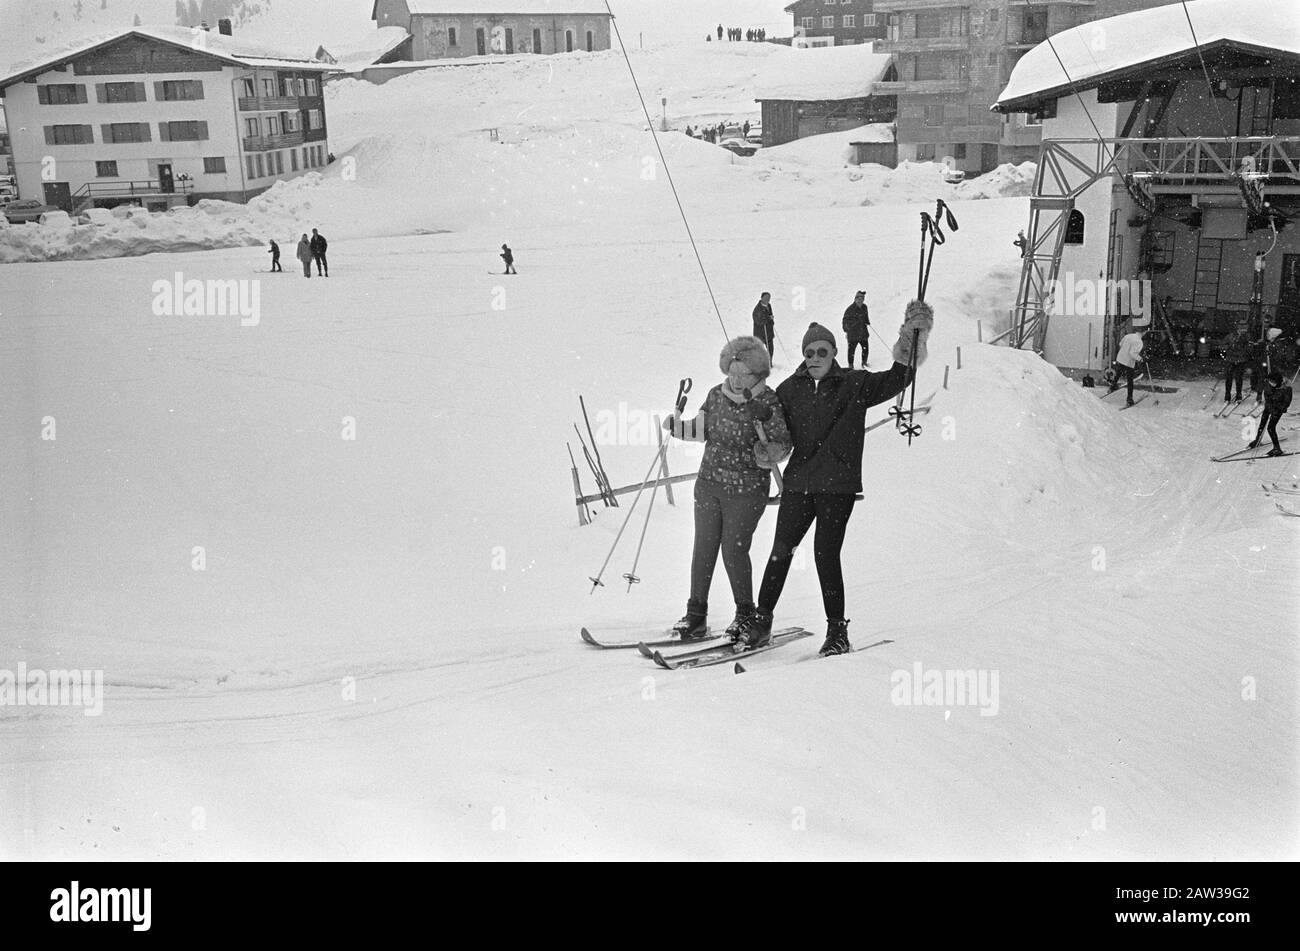 Royal family in Lech. Queen Juliana and Prince Bernhard let himself into the top mountainside. Queen Juliana of the skis Date: March 4, 1968 Location: Lech Keywords: families, queens, skis Person Name: Bernhard, prince, Juliana (queen Netherlands) Stock Photo